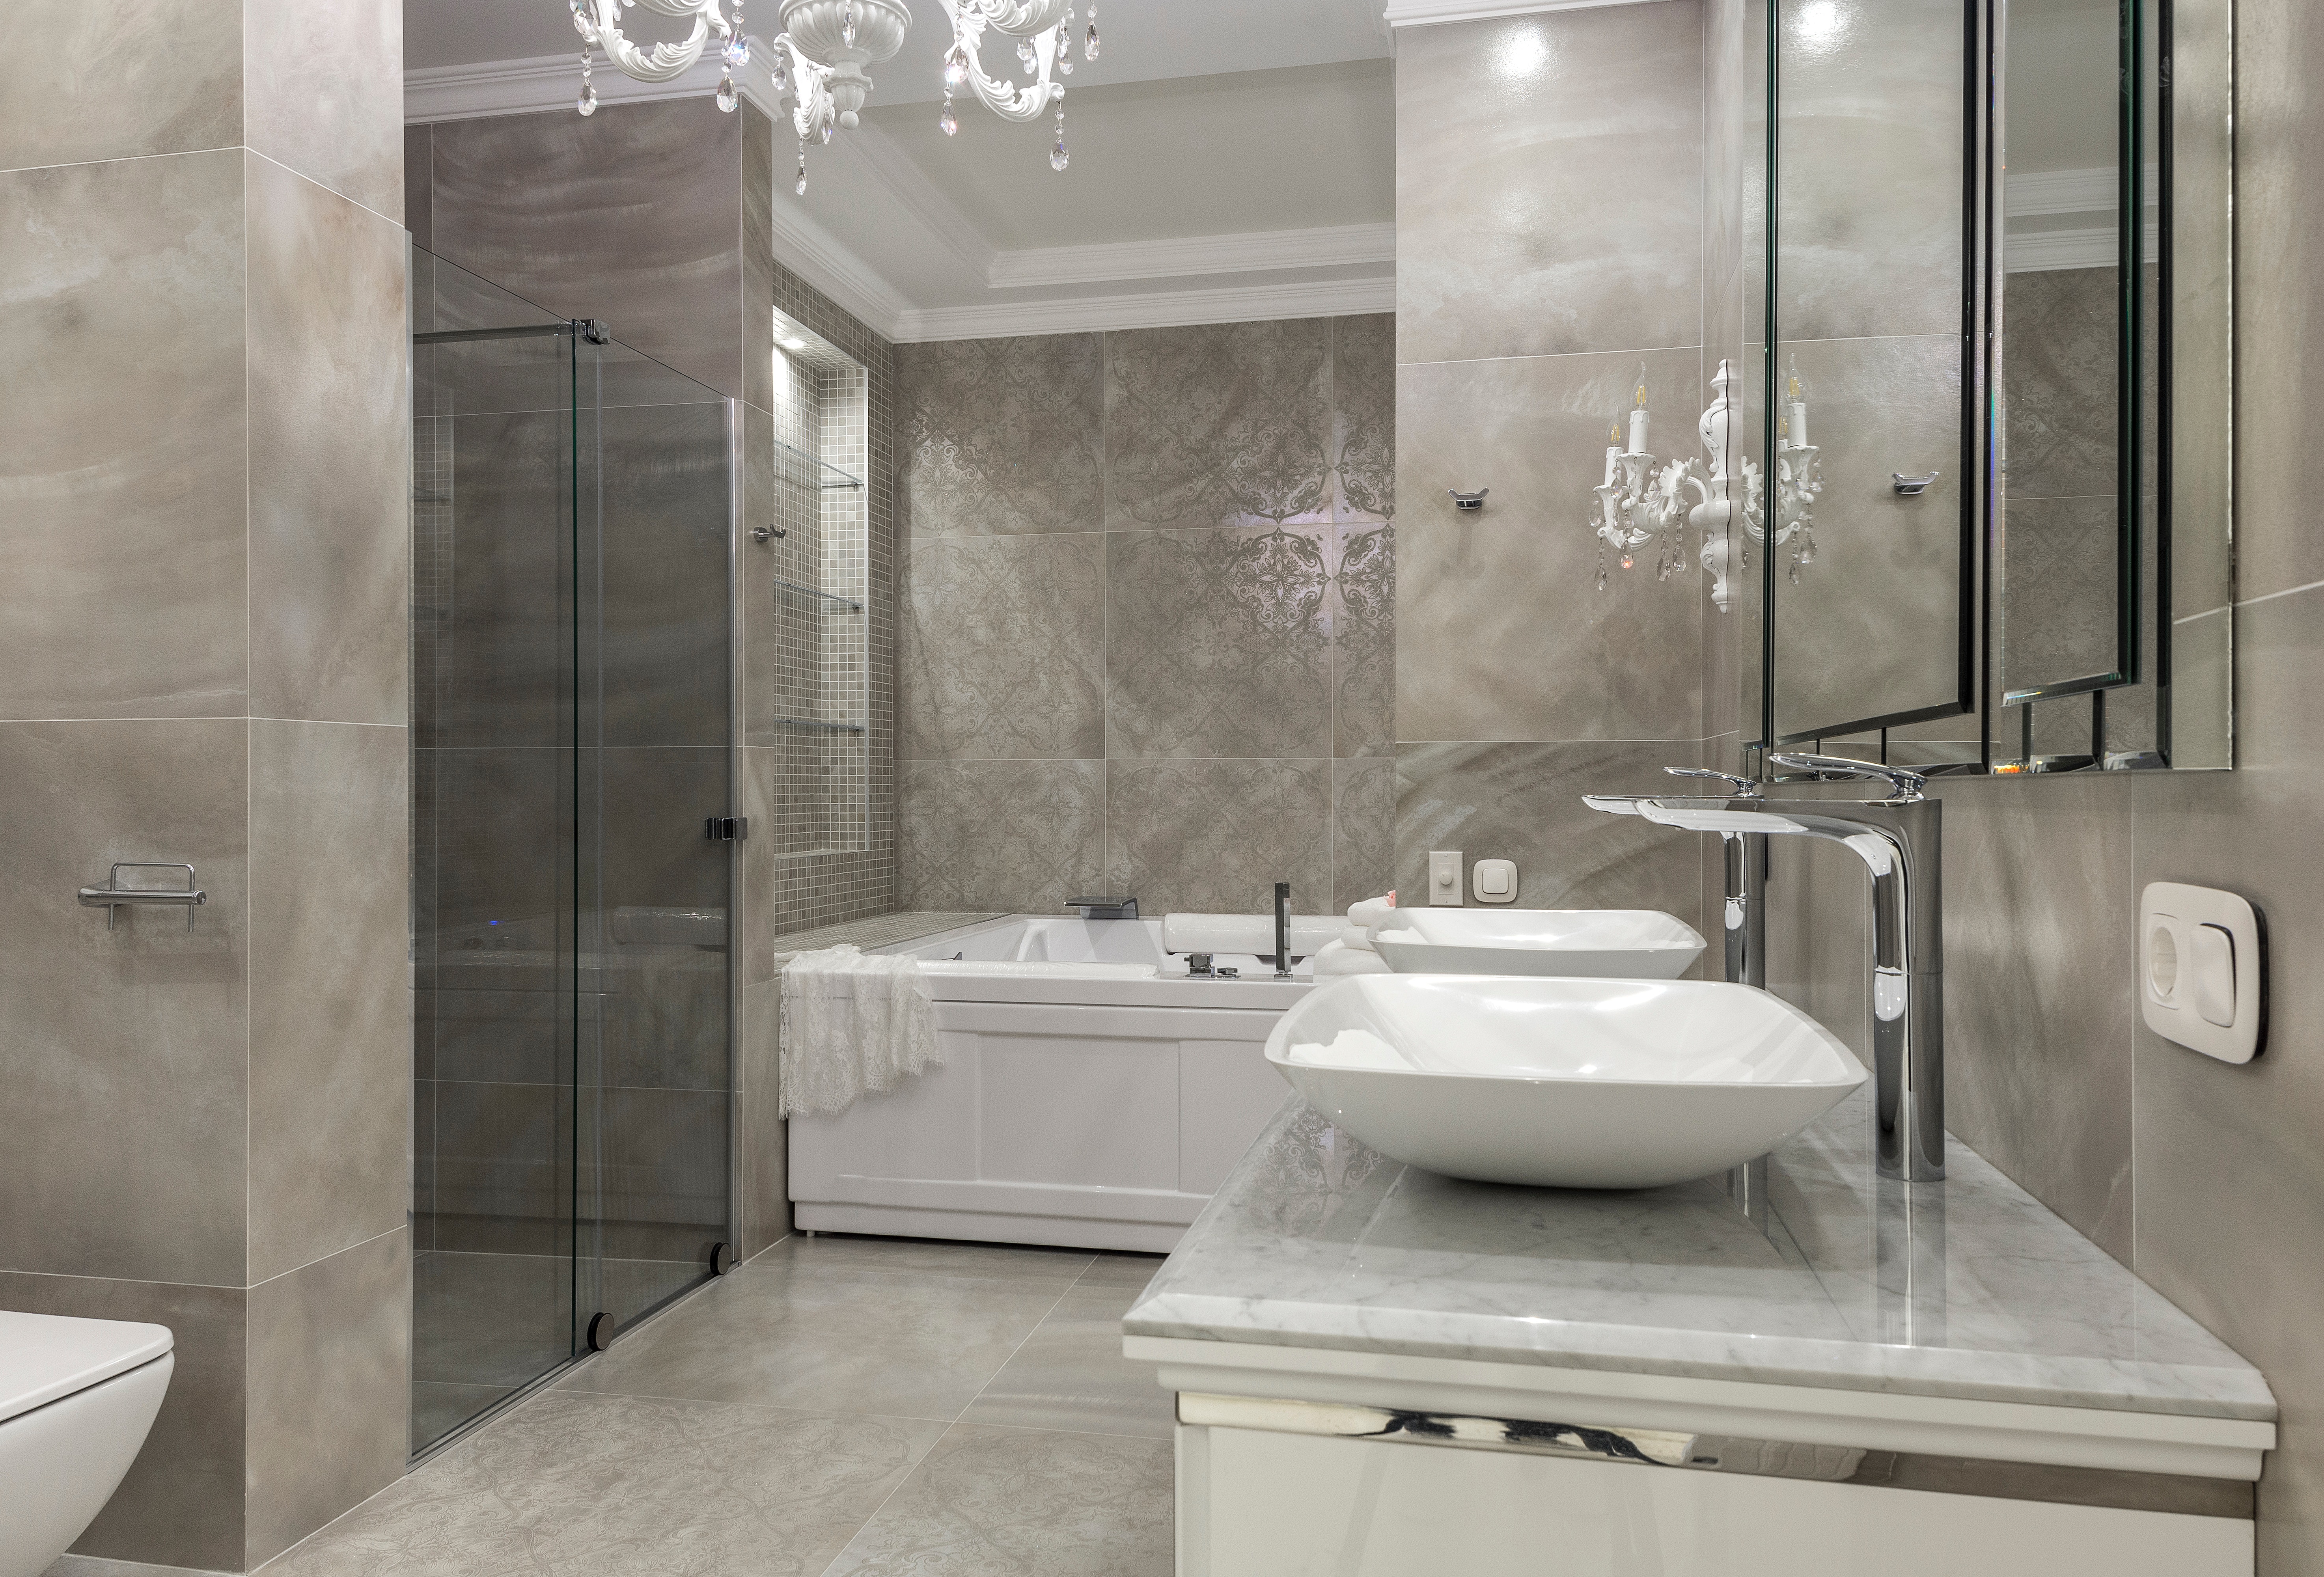 Choosing Your First Bathroom Tiles – A Buyer’s Guide